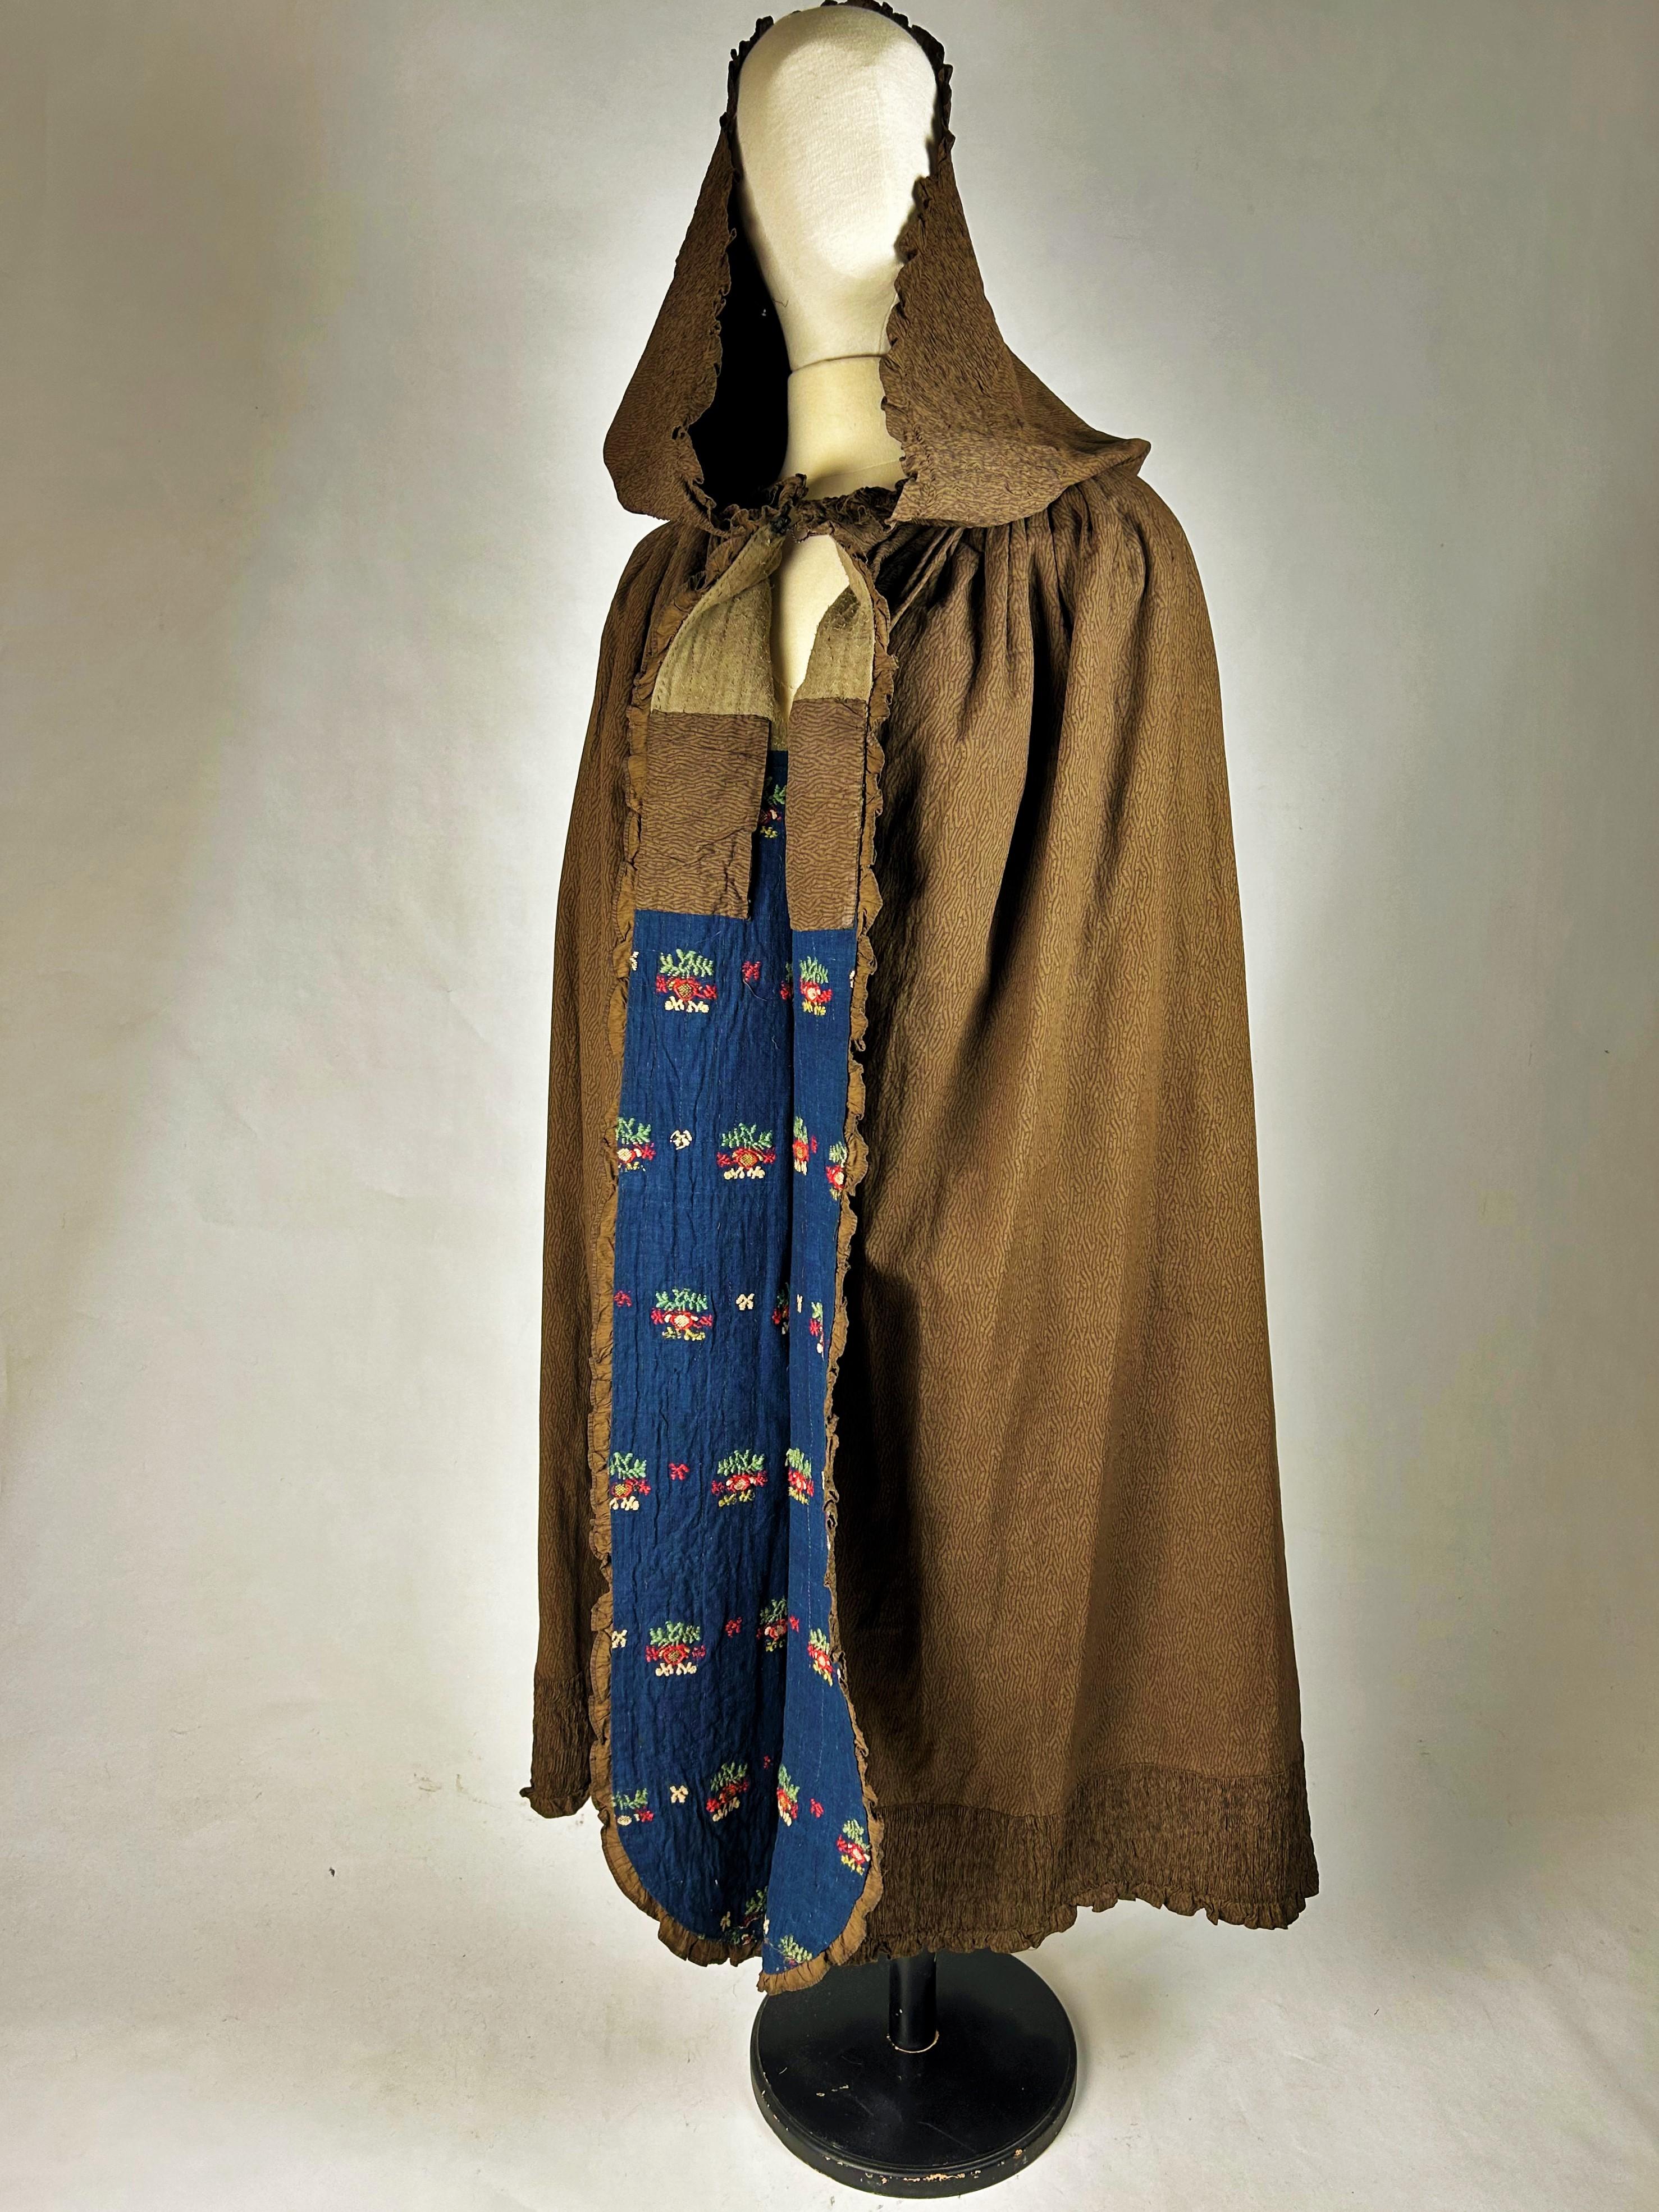 First third of the 19th century
Provence
Beautiful Polonaise Cape or hooded cloak in Puce printed cotton imitating chinés à la branche. It is lined with an astonishing reused 18th century Indigo cambric. Printed on cotton using a roller or copper